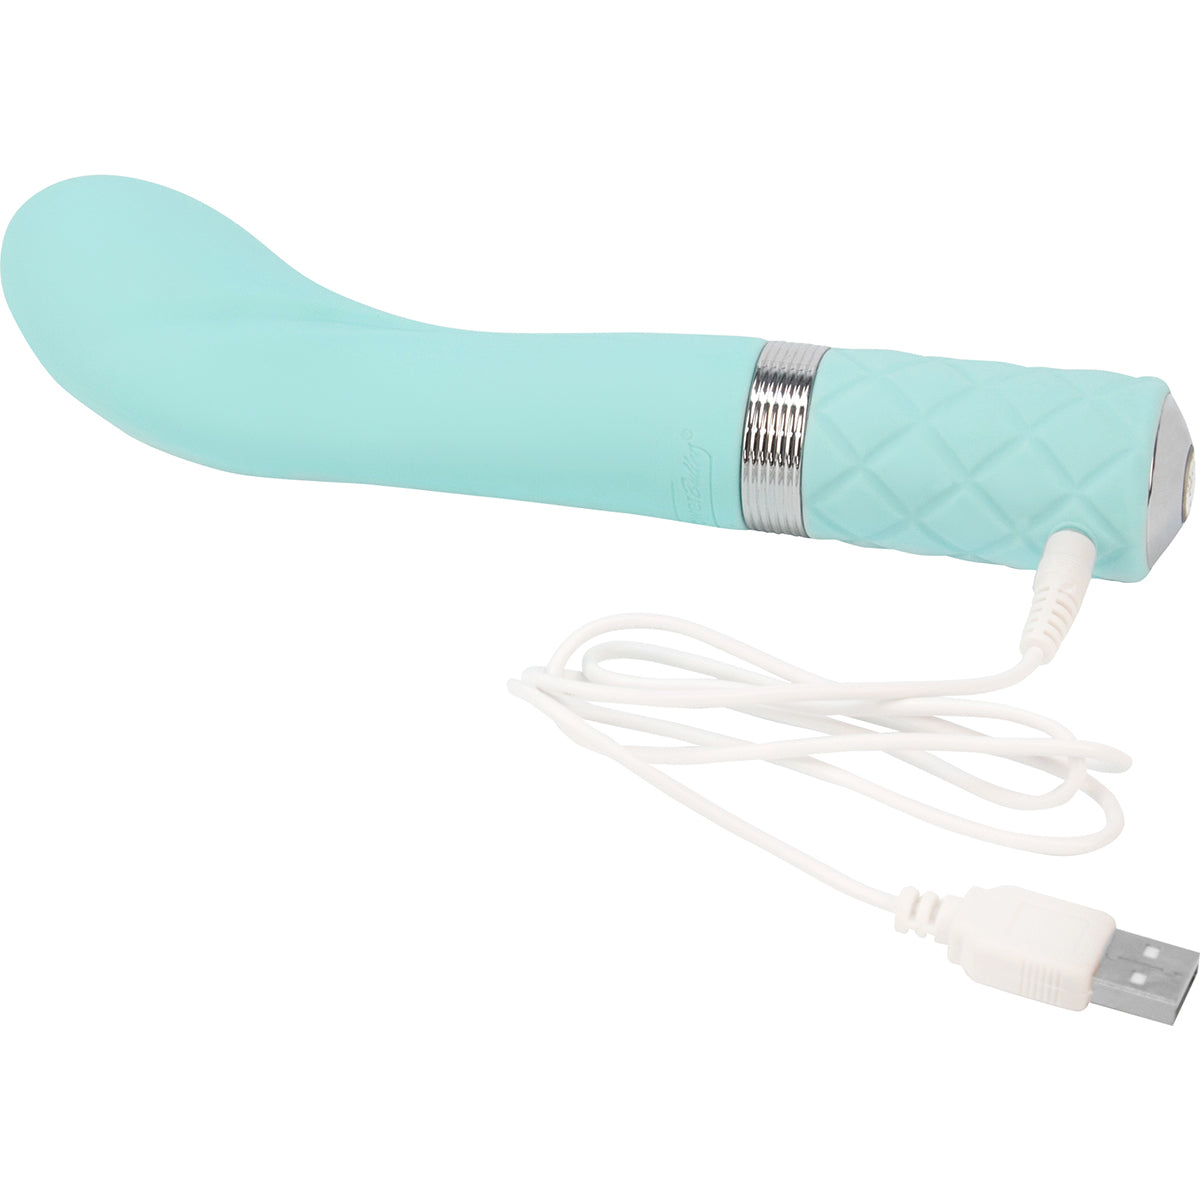 Pillow Talk Sassy G-Spot - Teal Intimates Adult Boutique